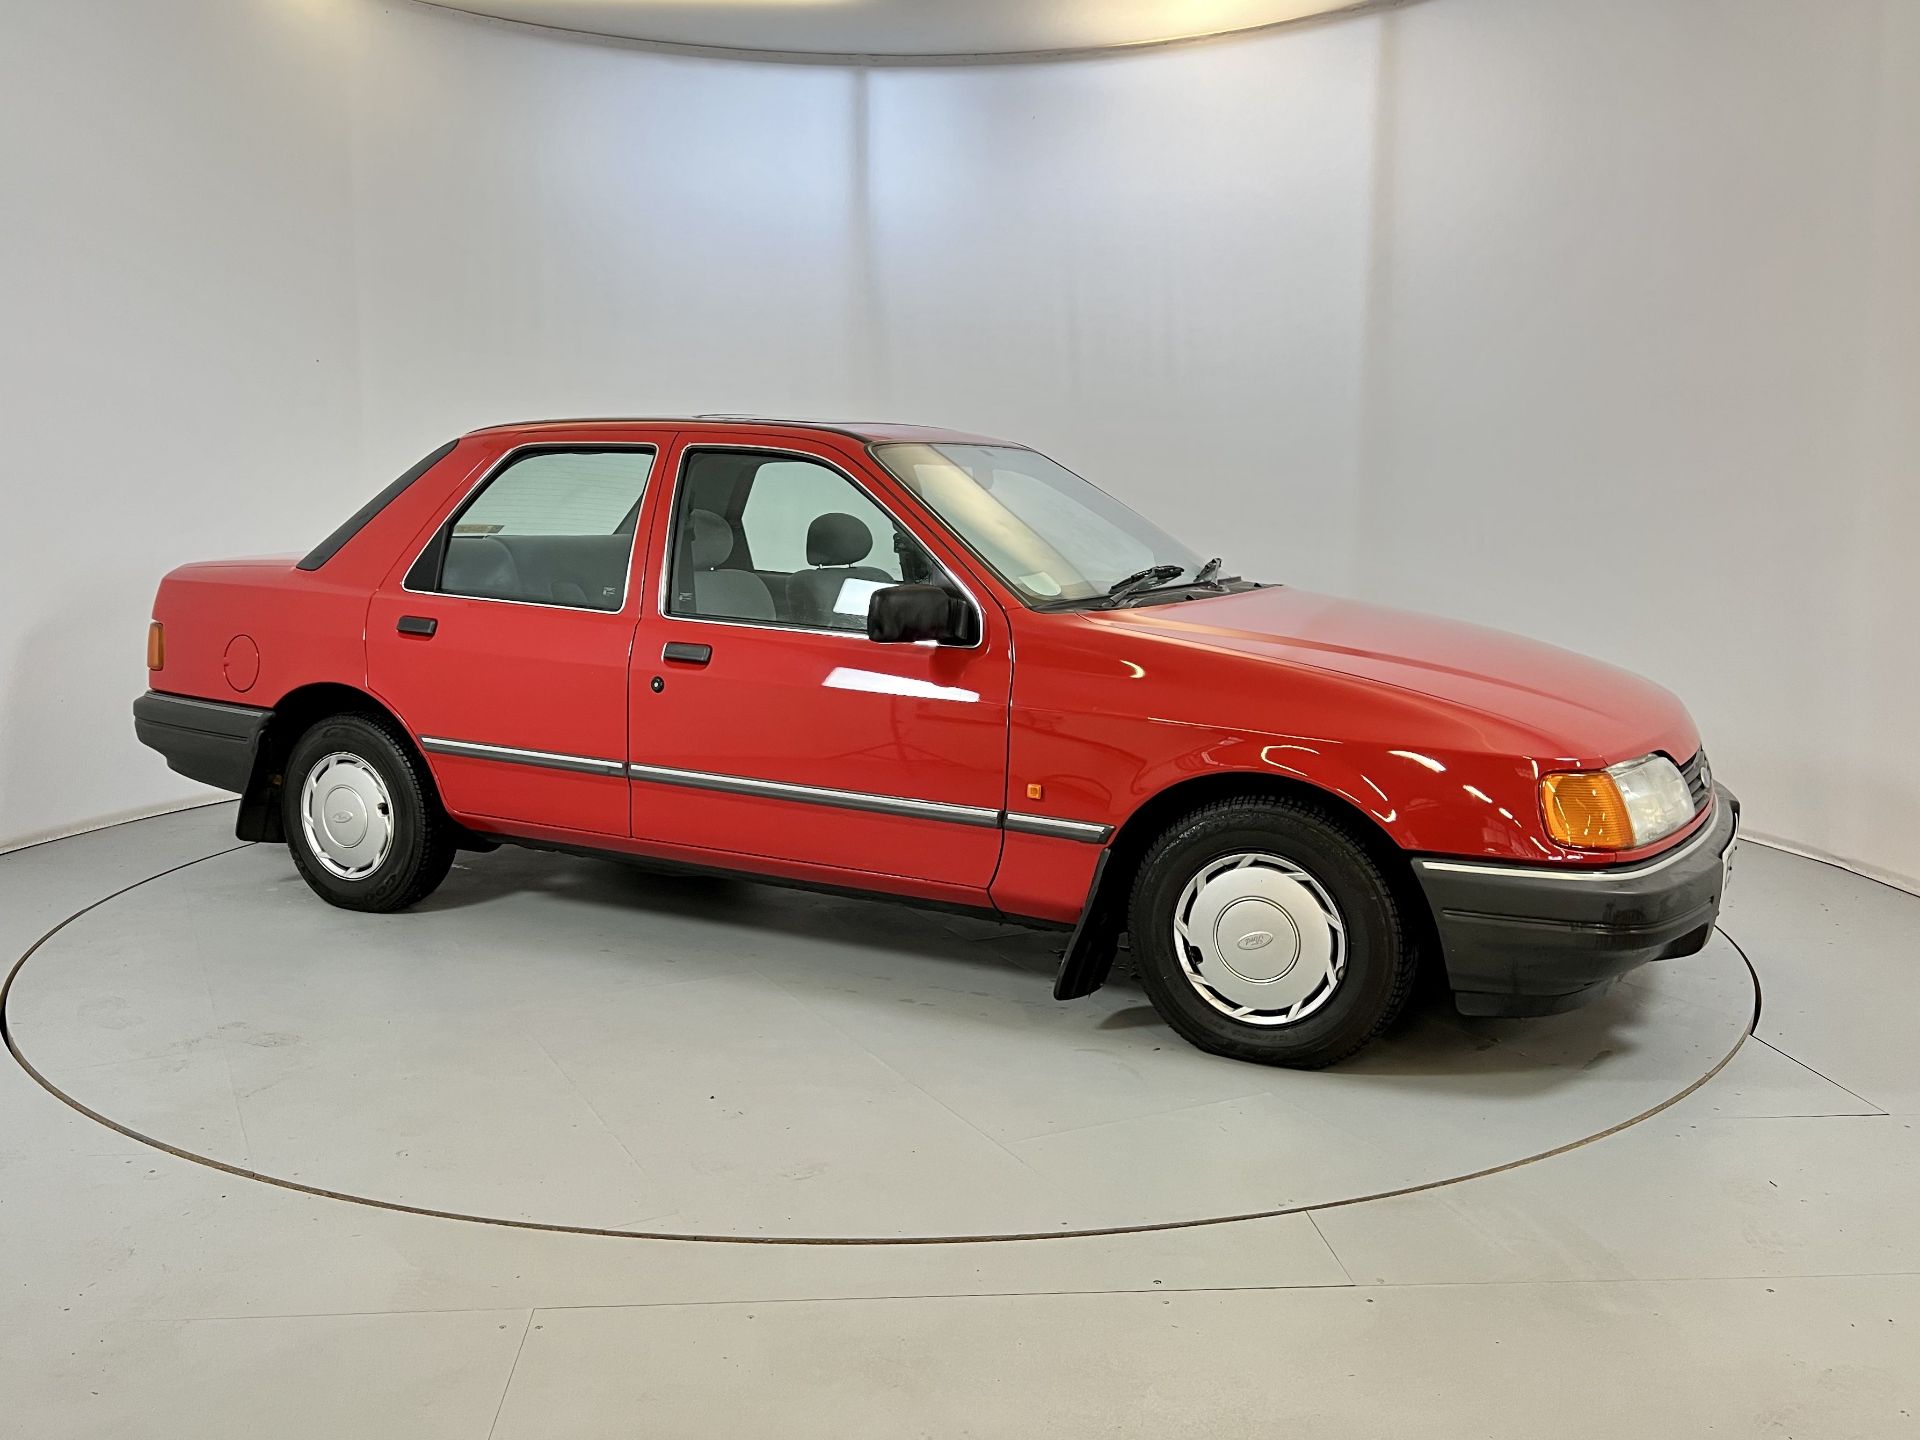 Ford Sierra Sapphire - Image 12 of 34